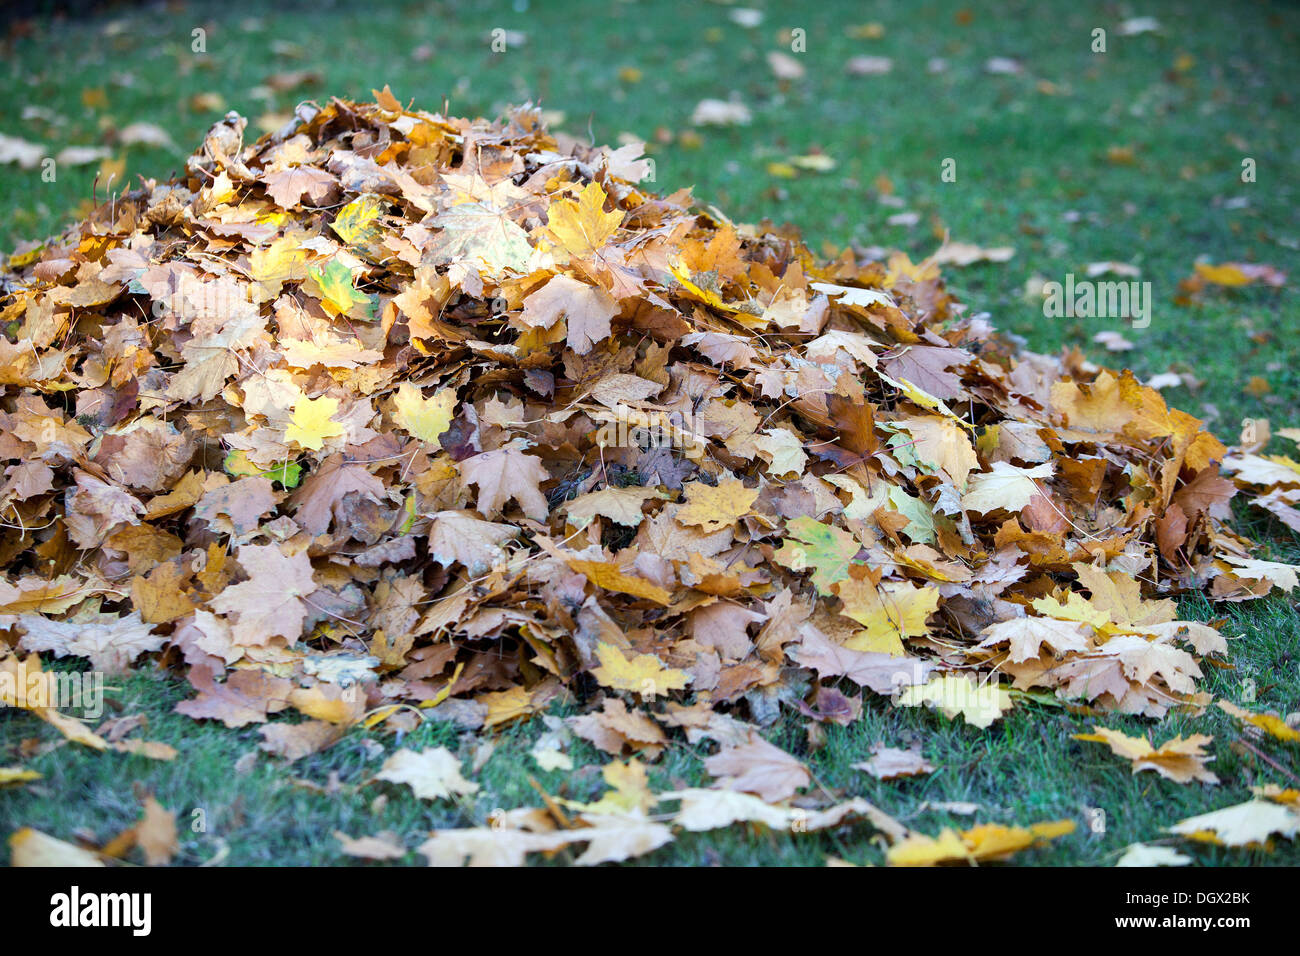 Heap of Leaves autumn composting pile autumn leaves Stock Photo